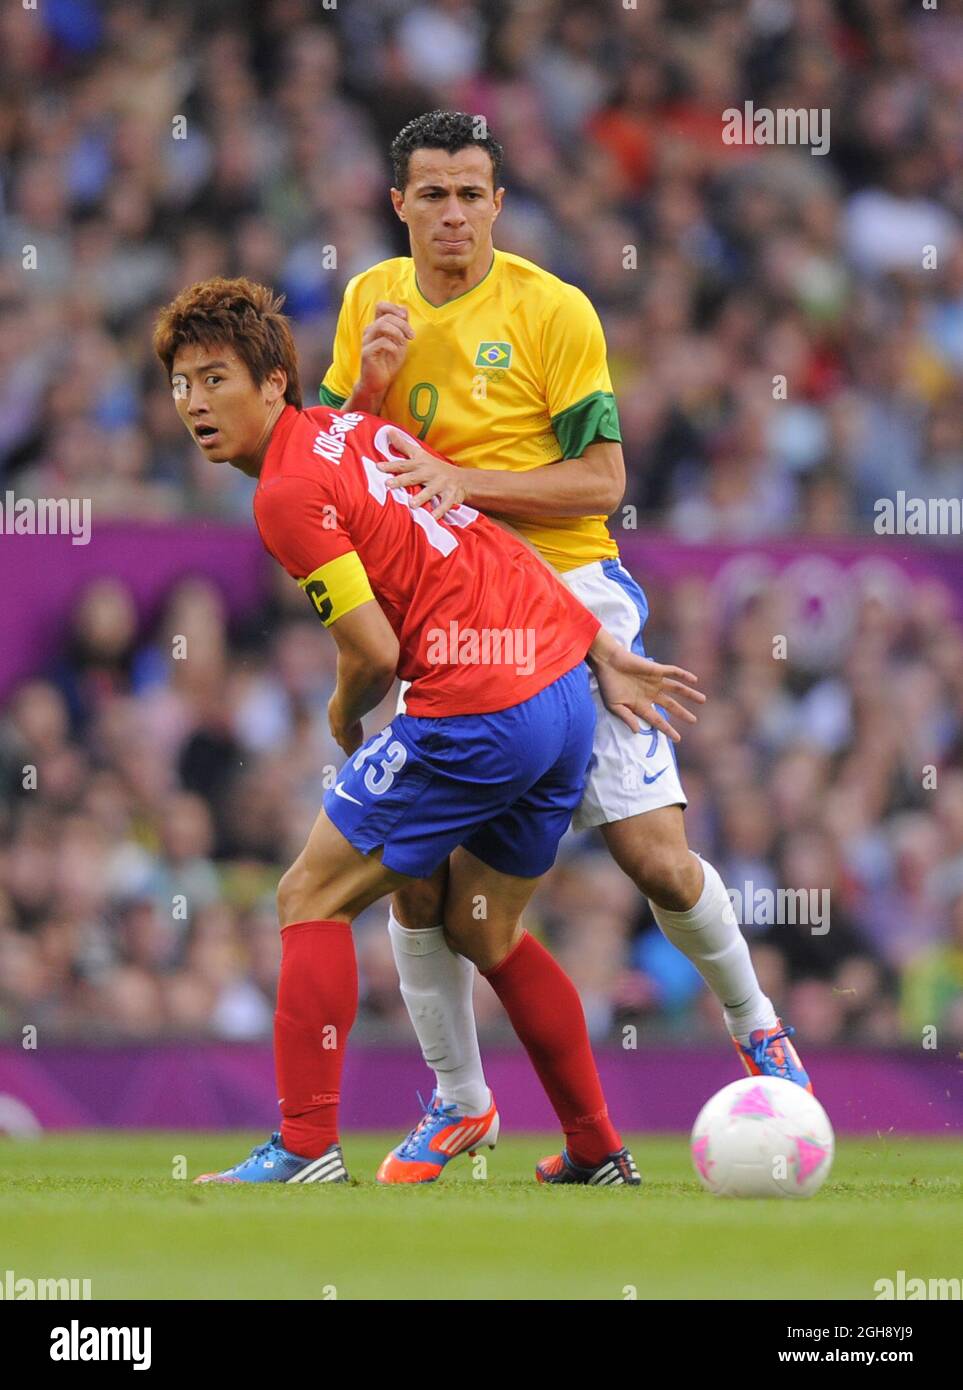 South Korea's Koo Ja-cheol tussles with Brazil's Leandro Damiao.South Korea v Brazil Olympic 2012 semi-final men's match at Old Trafford, Manchester United Kingdom on August 7, 2012. Stock Photo